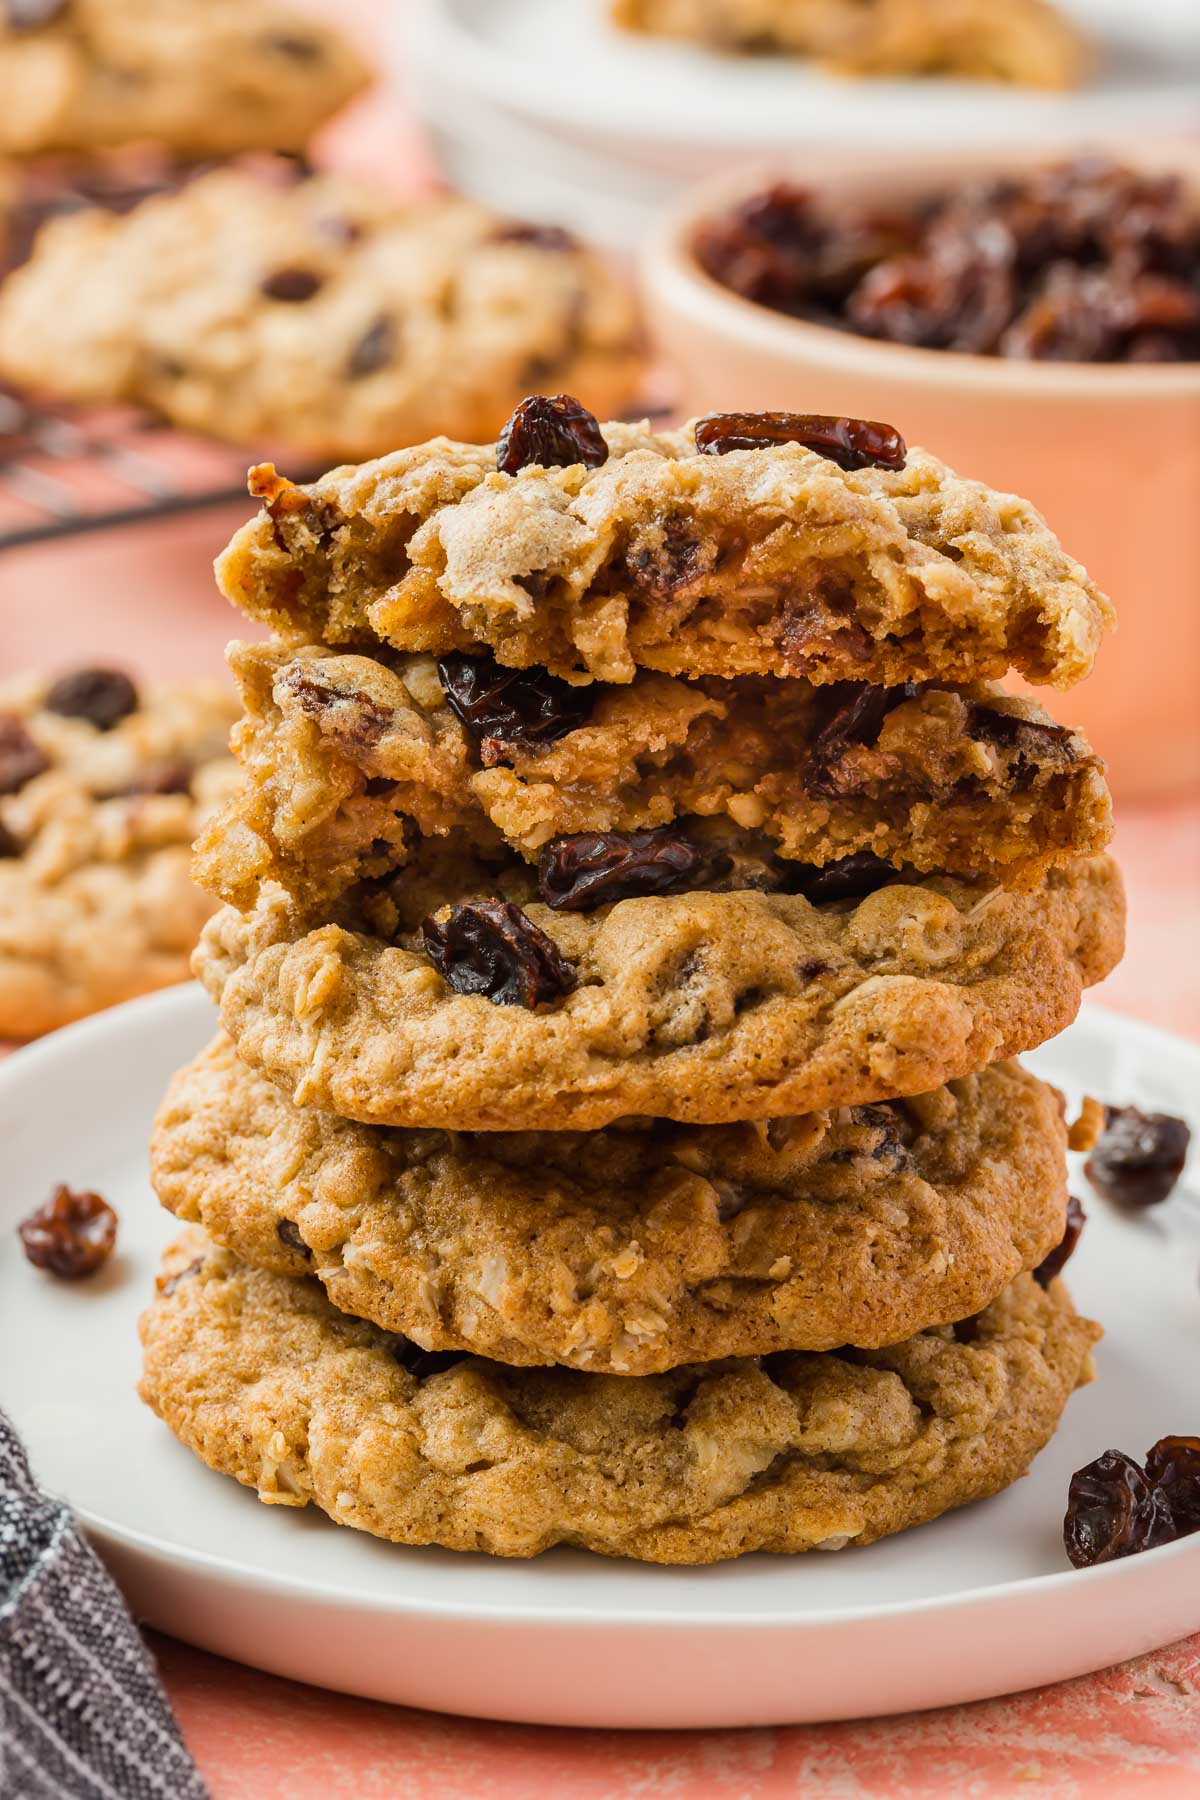 A stack of five gluten free oatmeal raisin cookies on a dessert plate with the top two broken in half to see the chewy interiors.